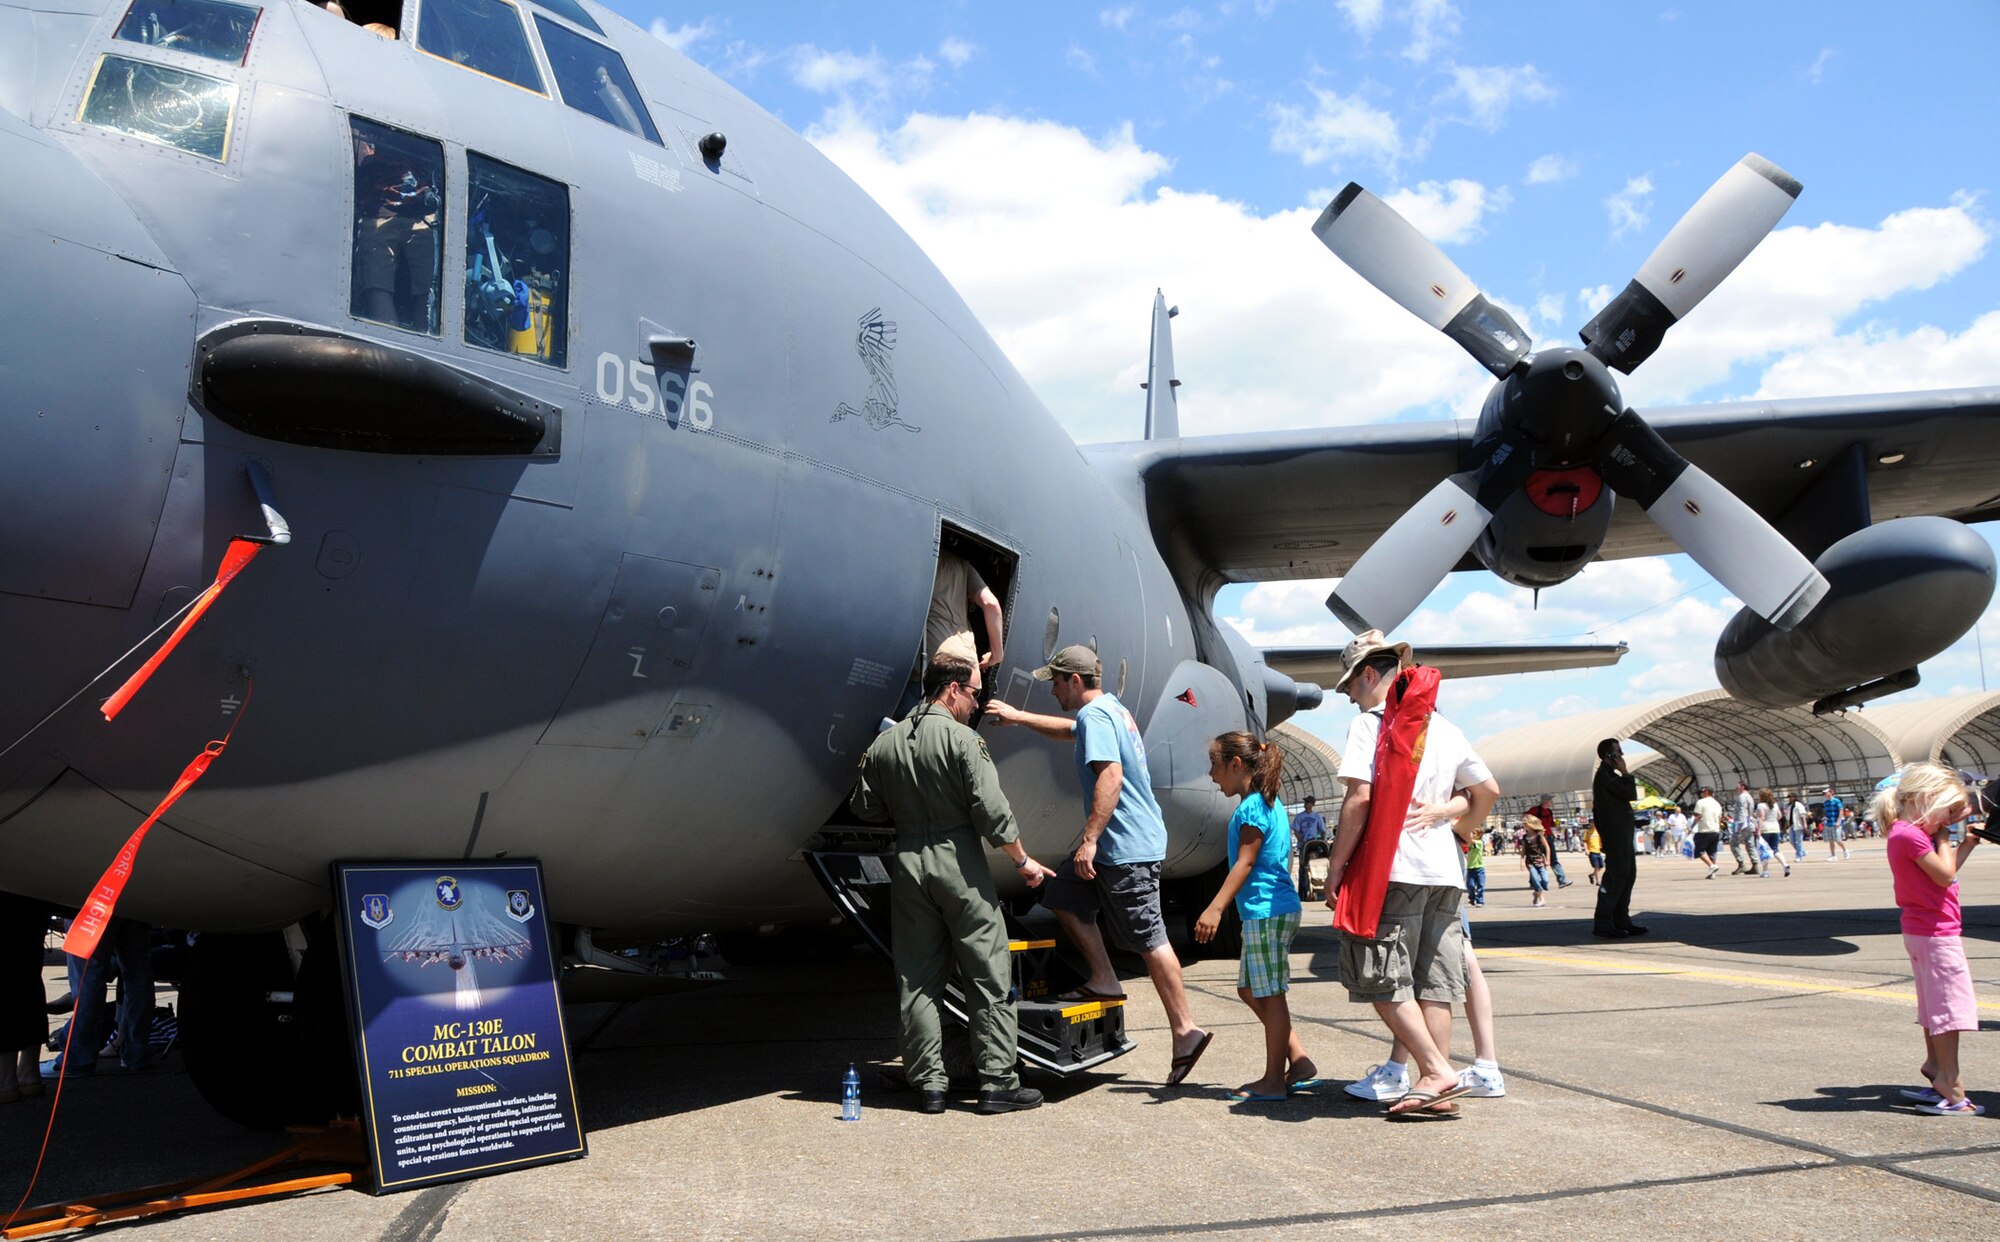 A 919th Special Operations Wing aircrew member helps patrons into a C-130E Combat Talon for a tour of the aircraft April 11 at the Eglin Air Force Base 75th Anniversary Airshow.  More than 125,000 were in attendance during the air show April 10-11, enjoying a variety of aerial performances and static displays. This was Eglin’s first open house since 2007 and was timed to coincide with the 75th anniversary of the installation. The Thunderbirds, F-22A Raptor demo and “Tora, Tora, Tora” were some of the highlights of the event.  (U.S. Air Force photo/Airman 1st Class Anthony Jennings.)